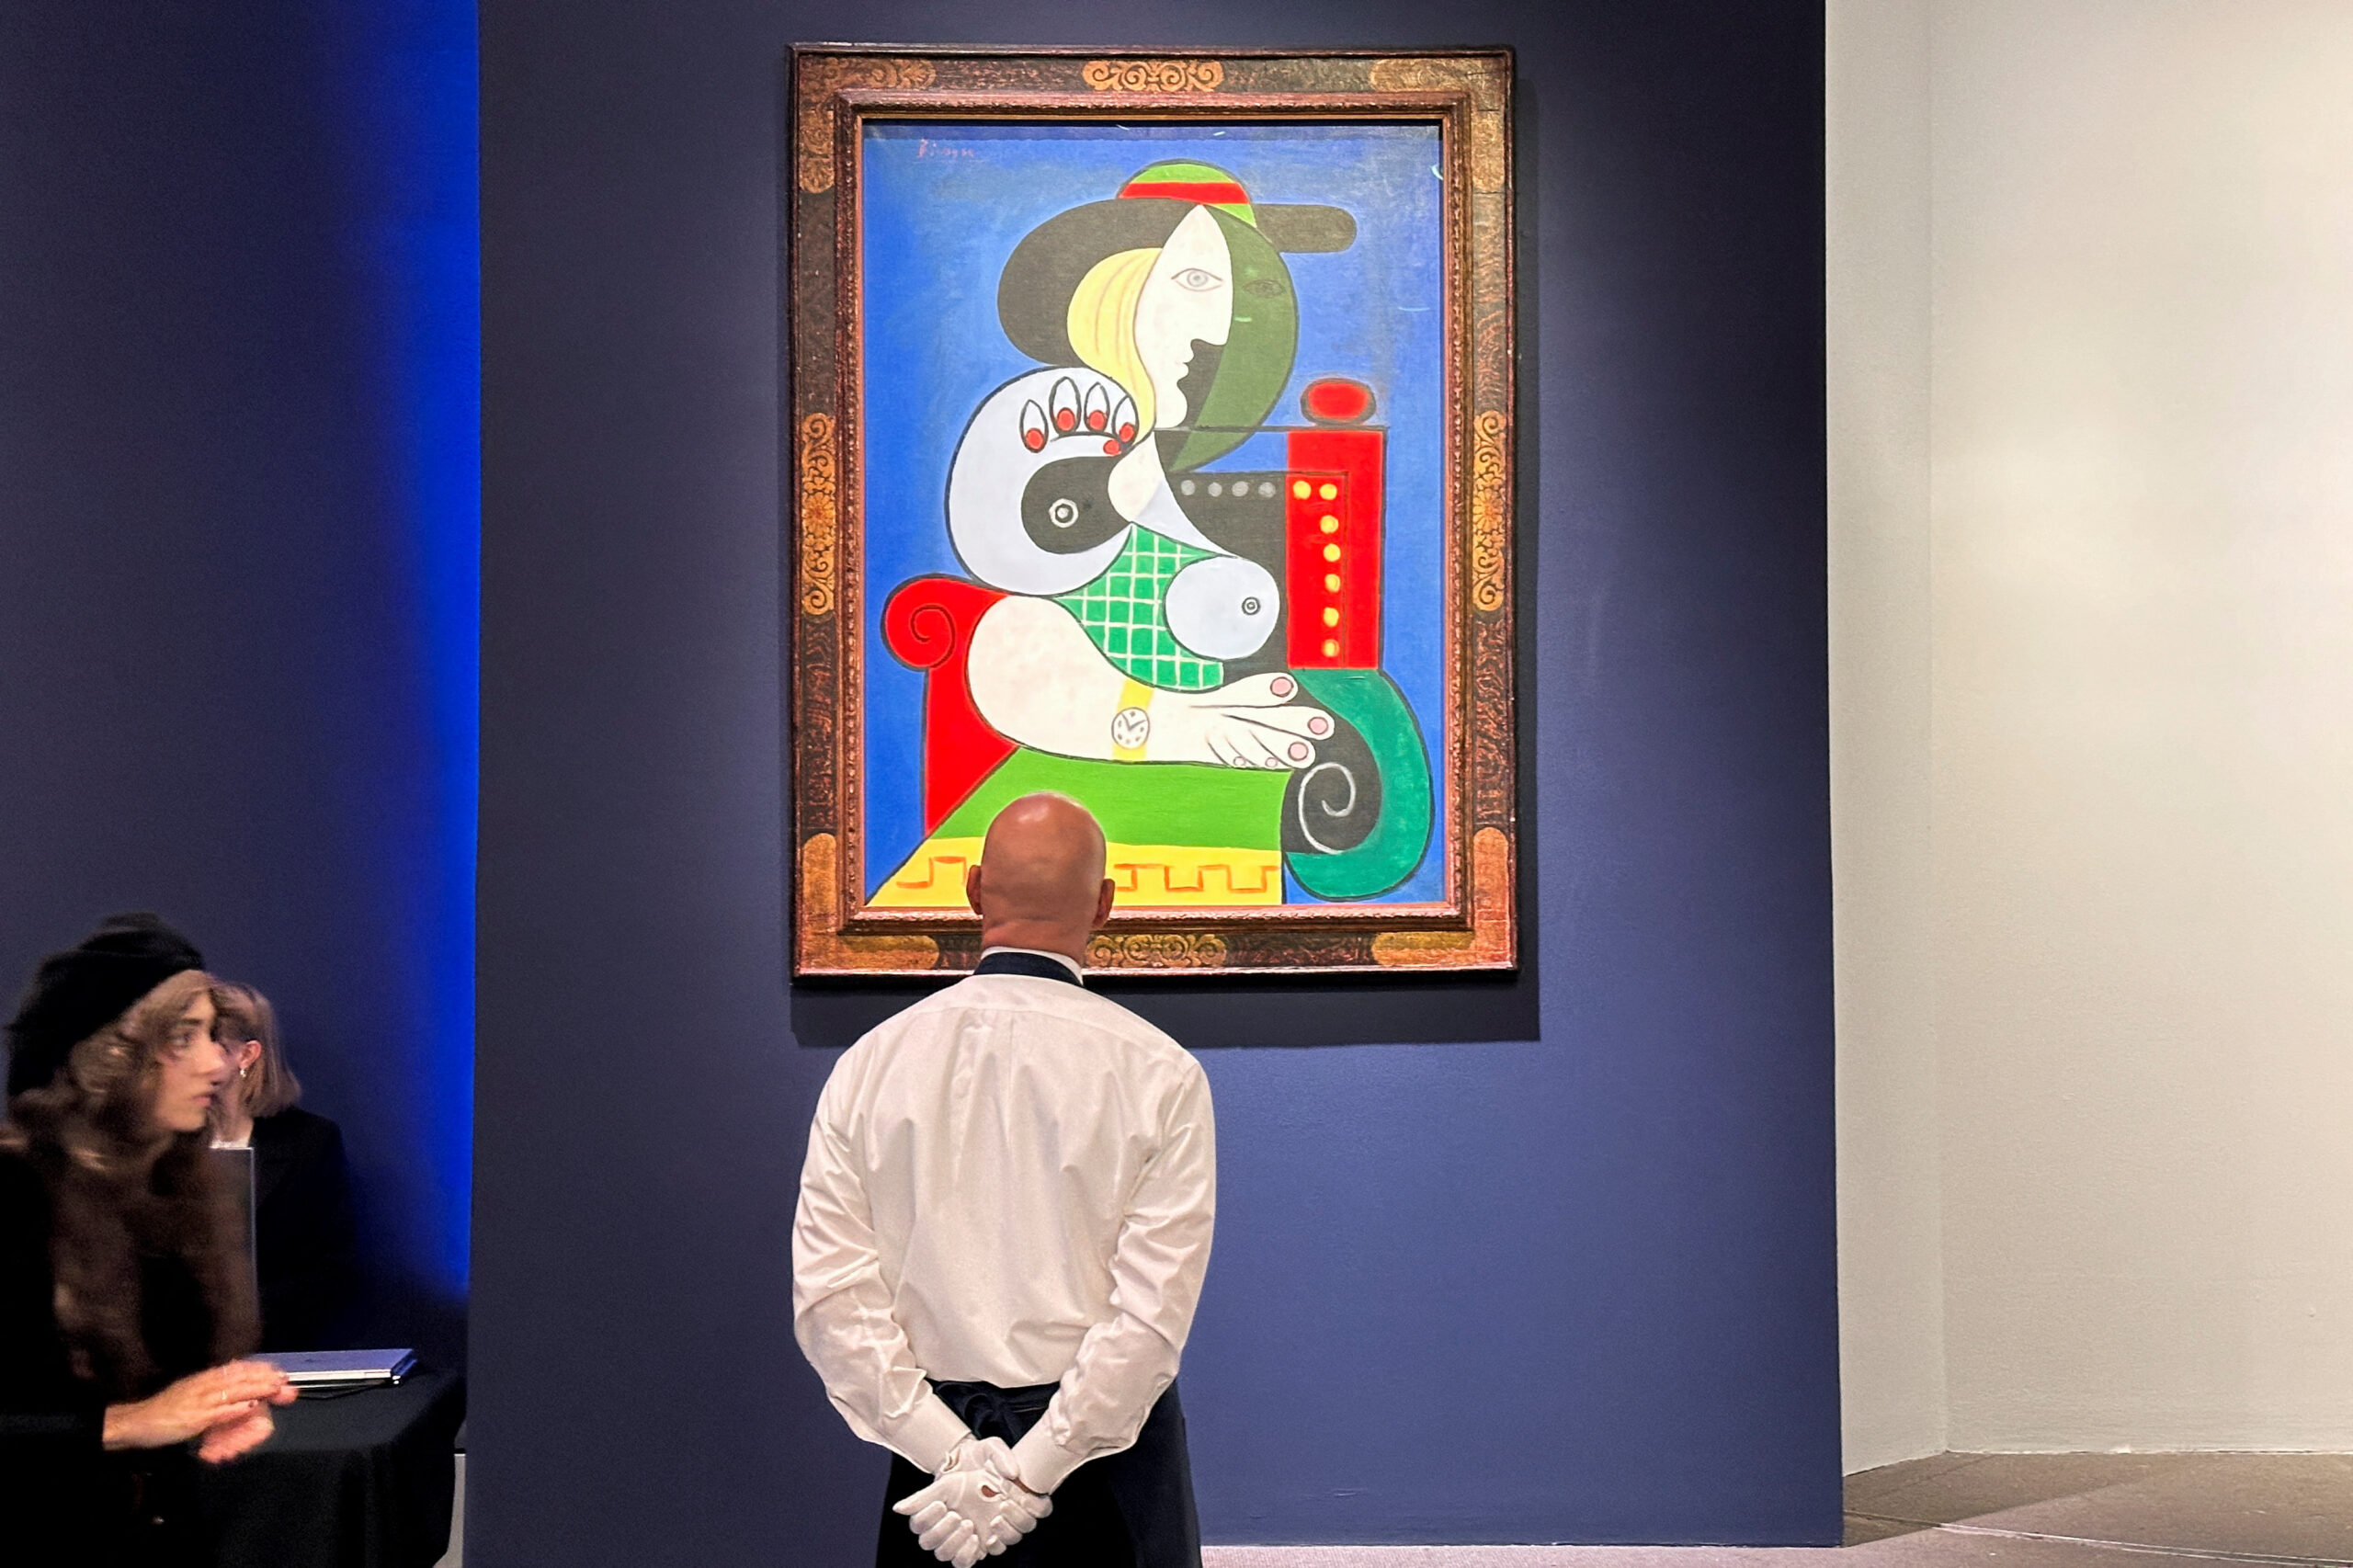 Picasso painting sells for $139M, most valuable art auctioned in 2023